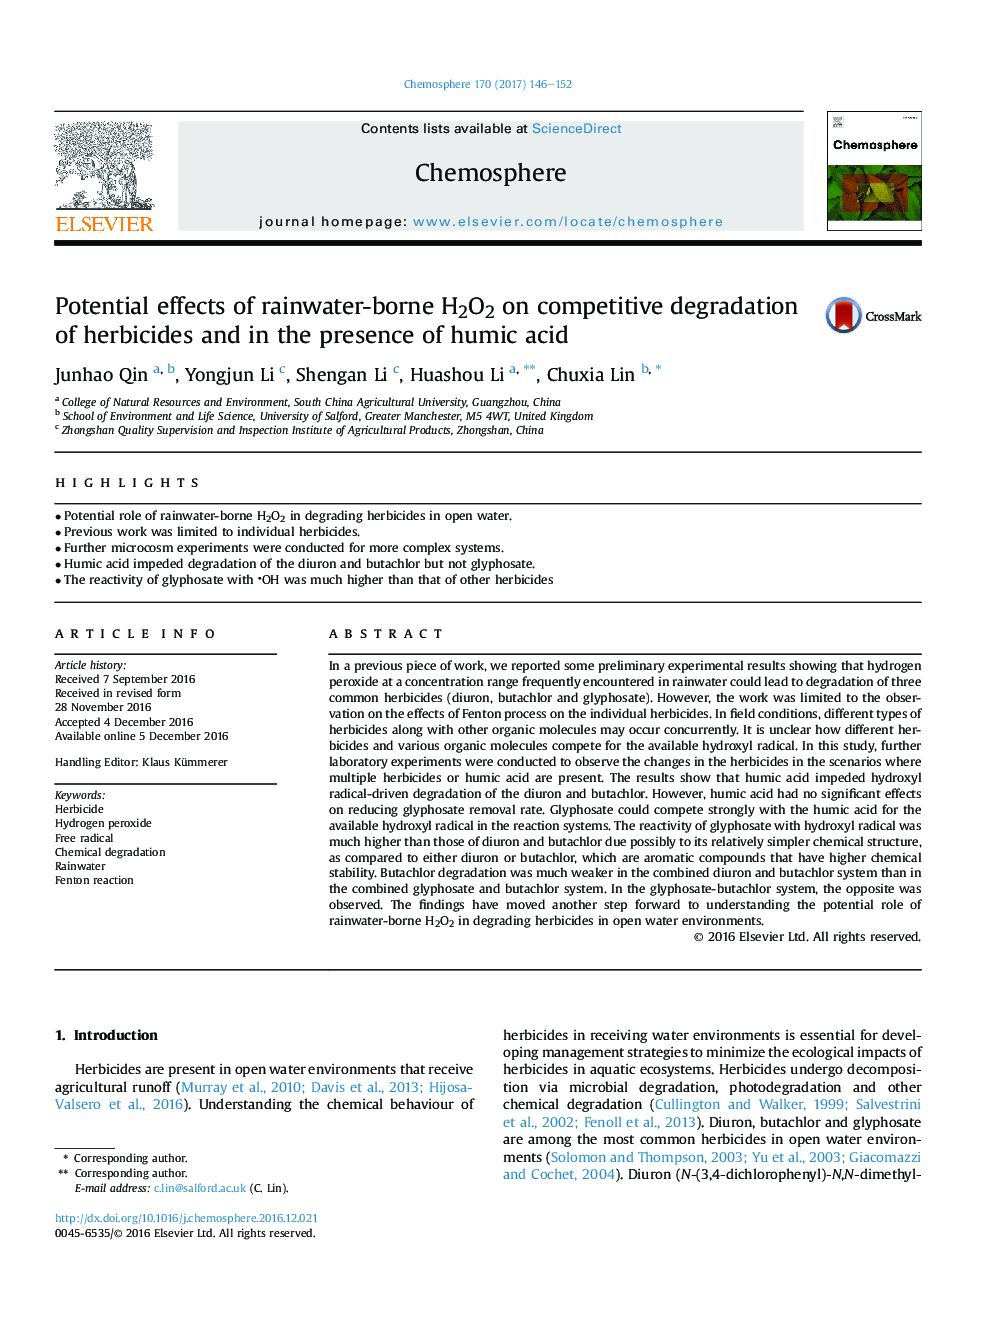 Potential effects of rainwater-borne H2O2 on competitive degradation of herbicides and in the presence of humic acid